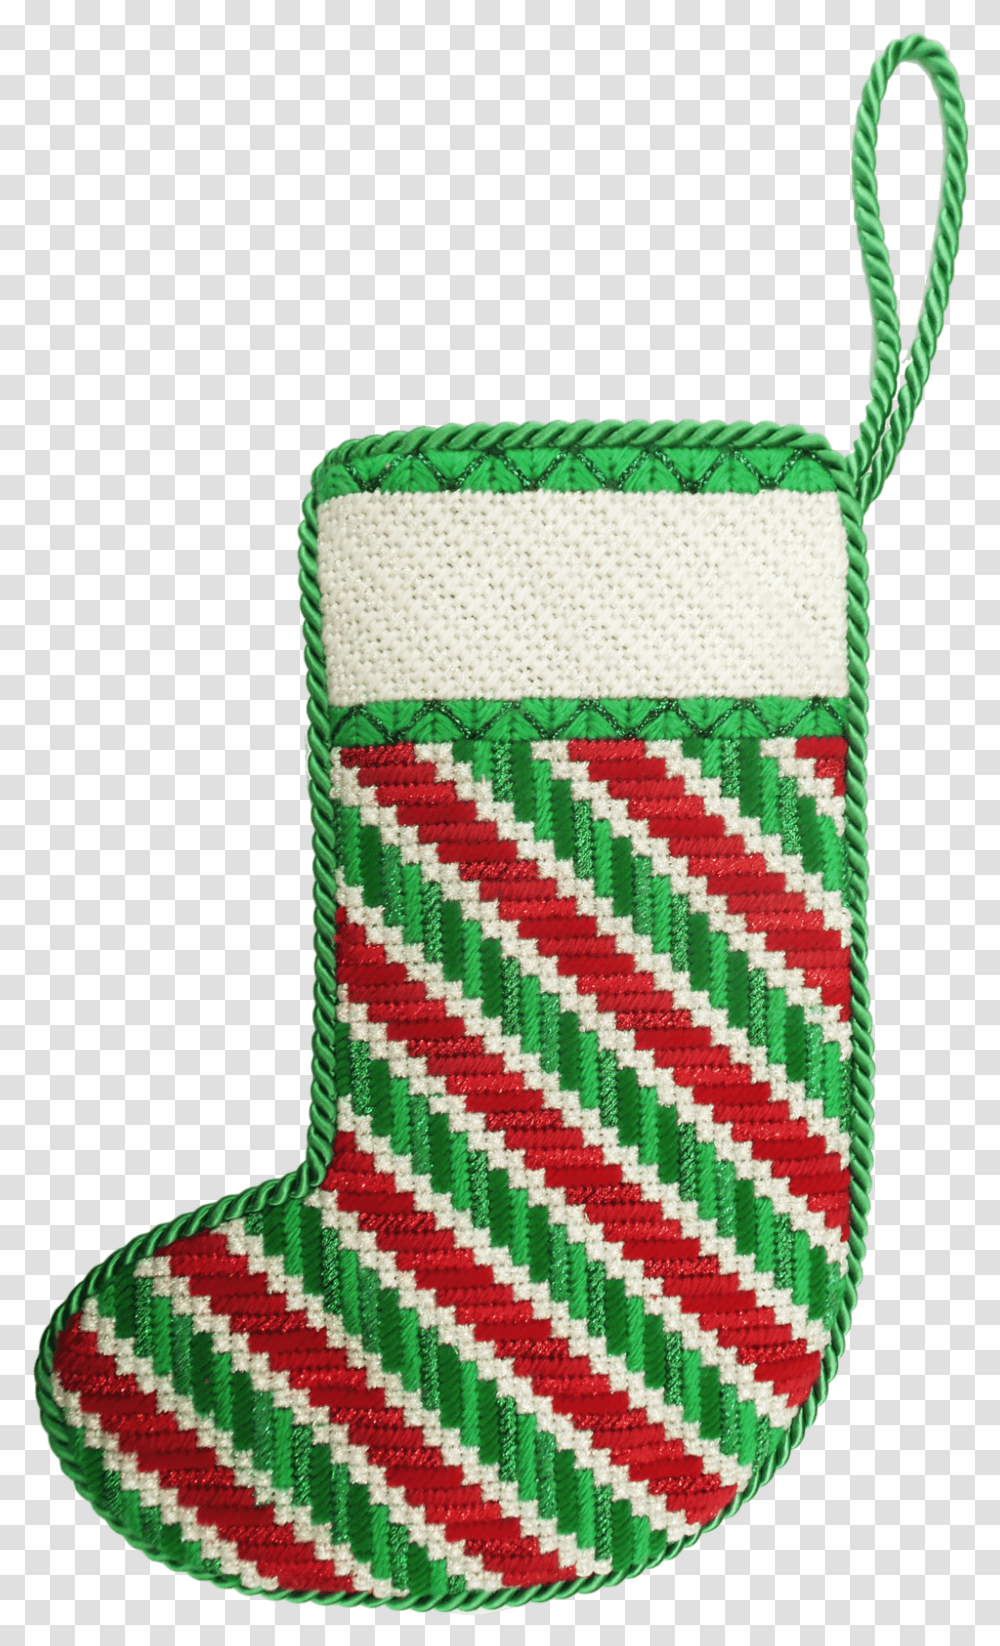 Download Christmas Stockings Image With No Christmas Stocking, Rug, Gift, Boot, Footwear Transparent Png